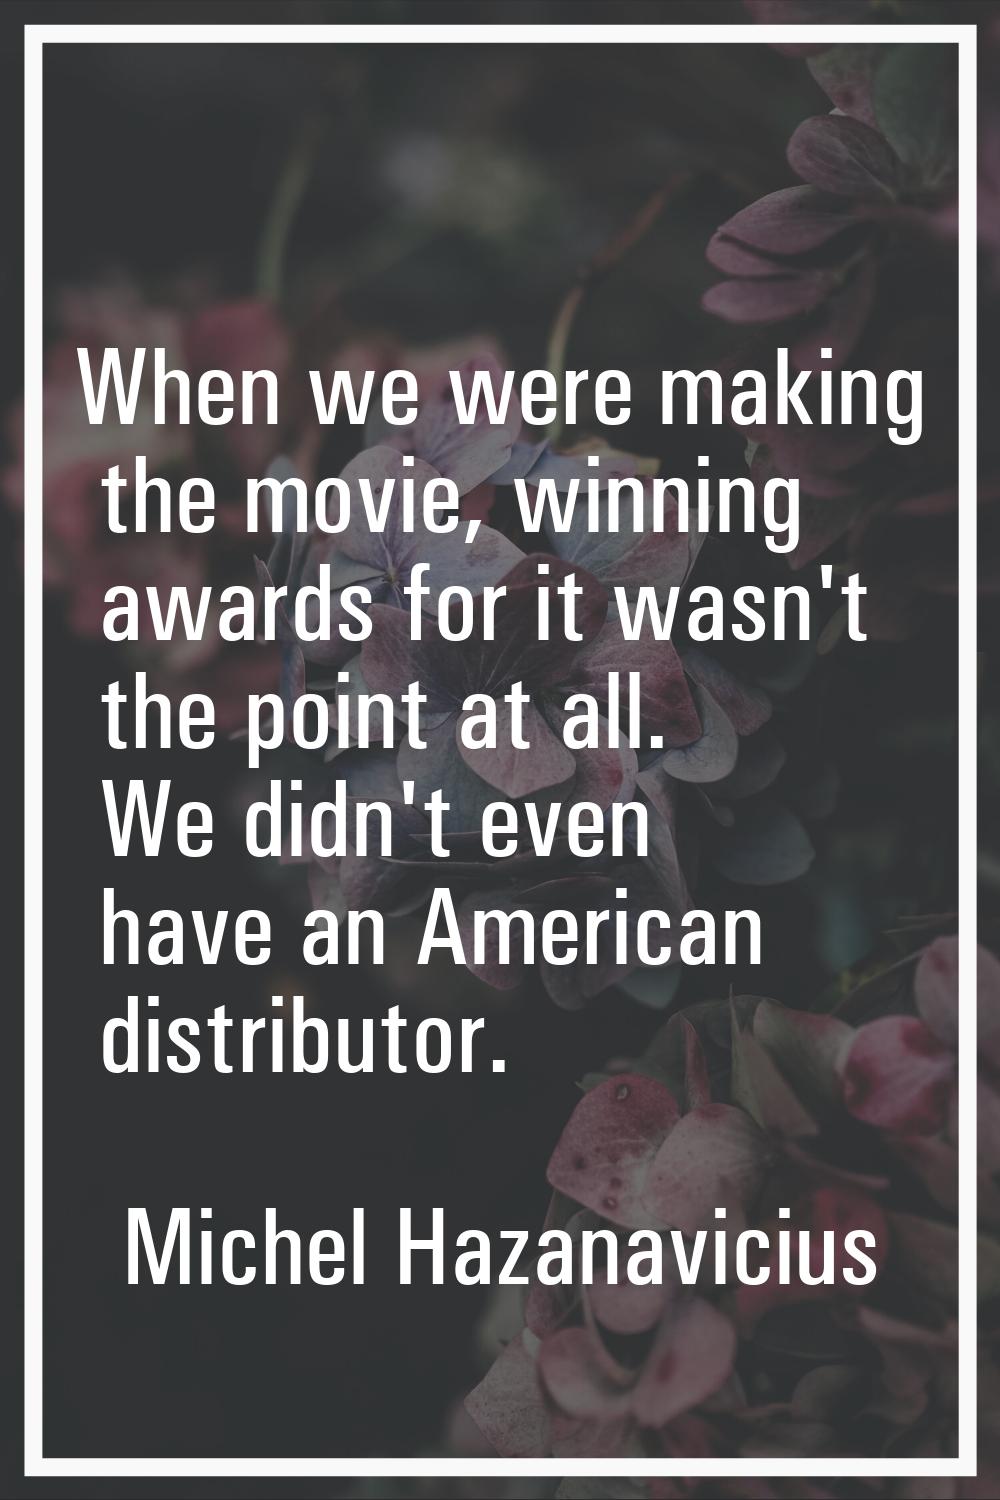 When we were making the movie, winning awards for it wasn't the point at all. We didn't even have a